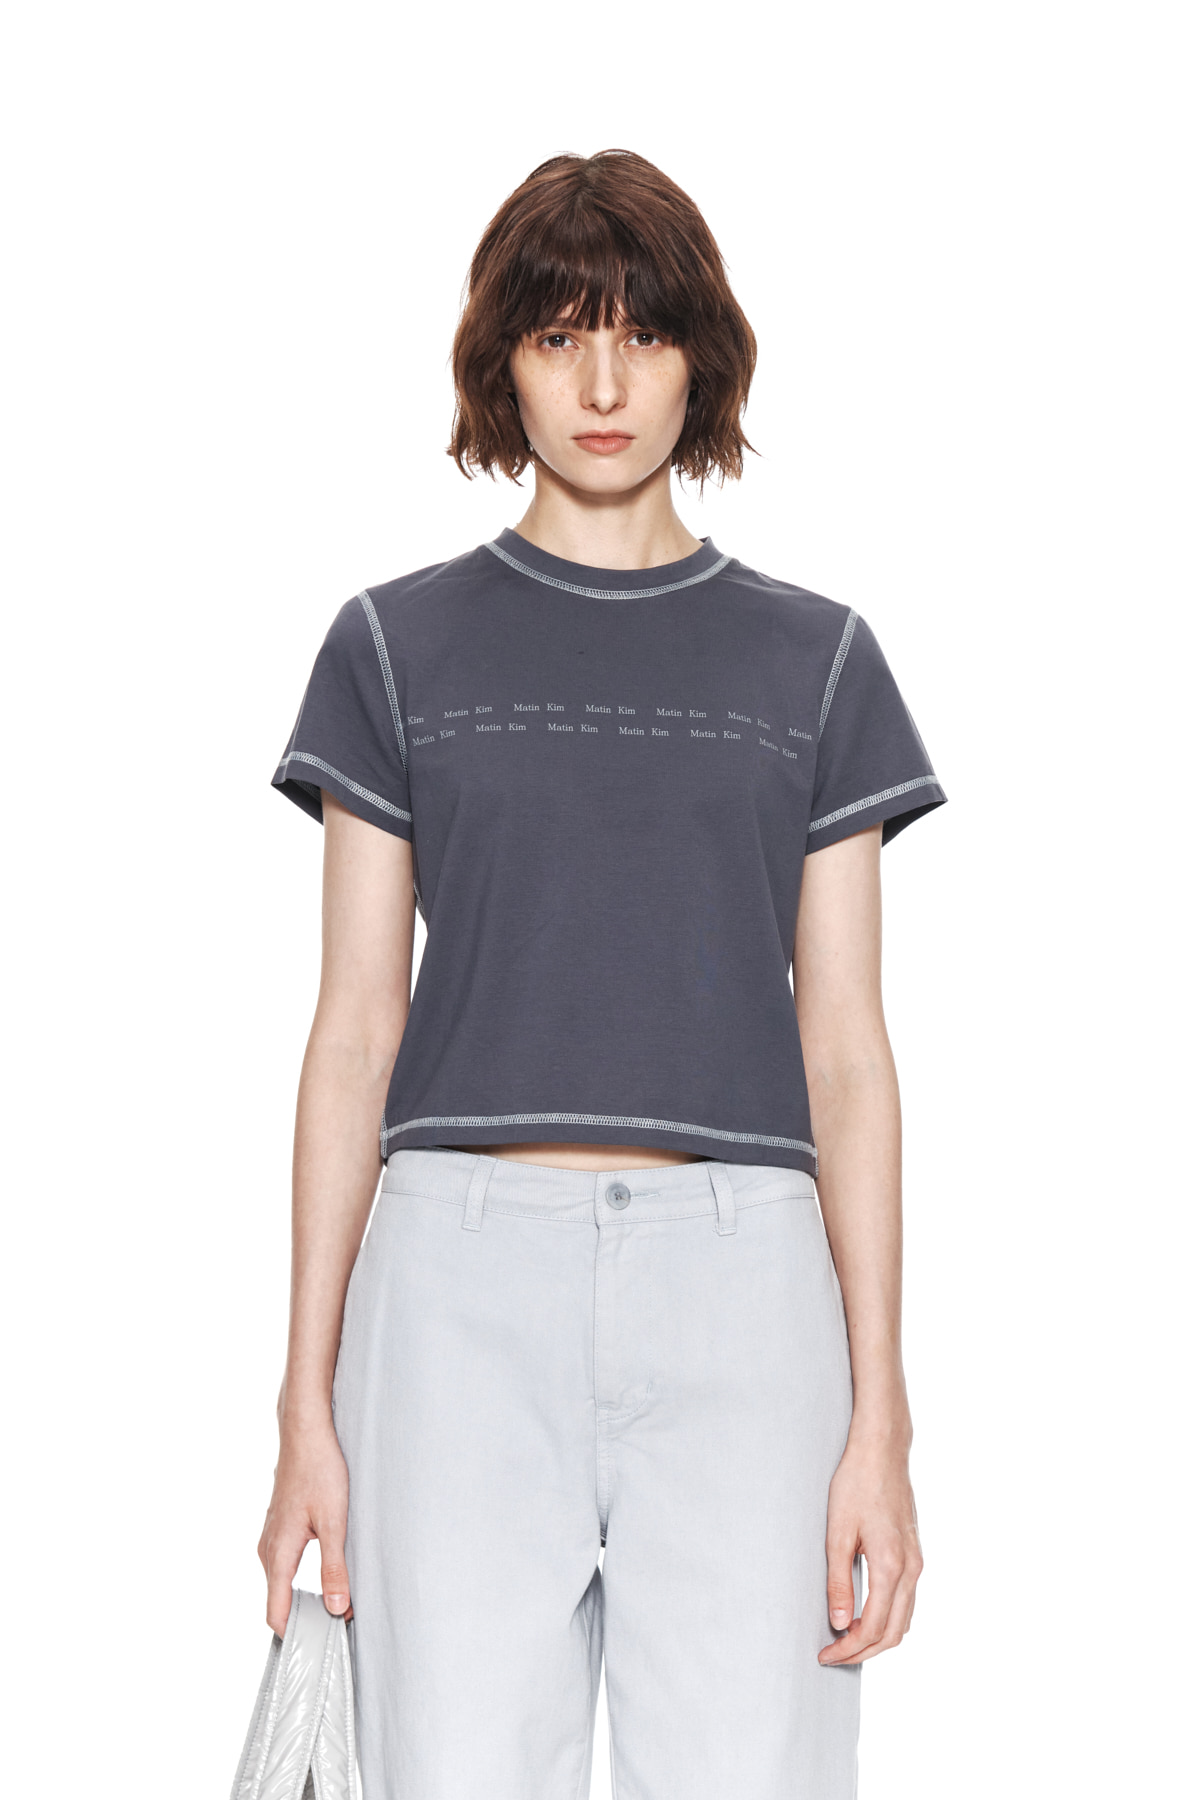 DOUBLE LINE LOGO STITCH CROP TOP IN CHARCOAL